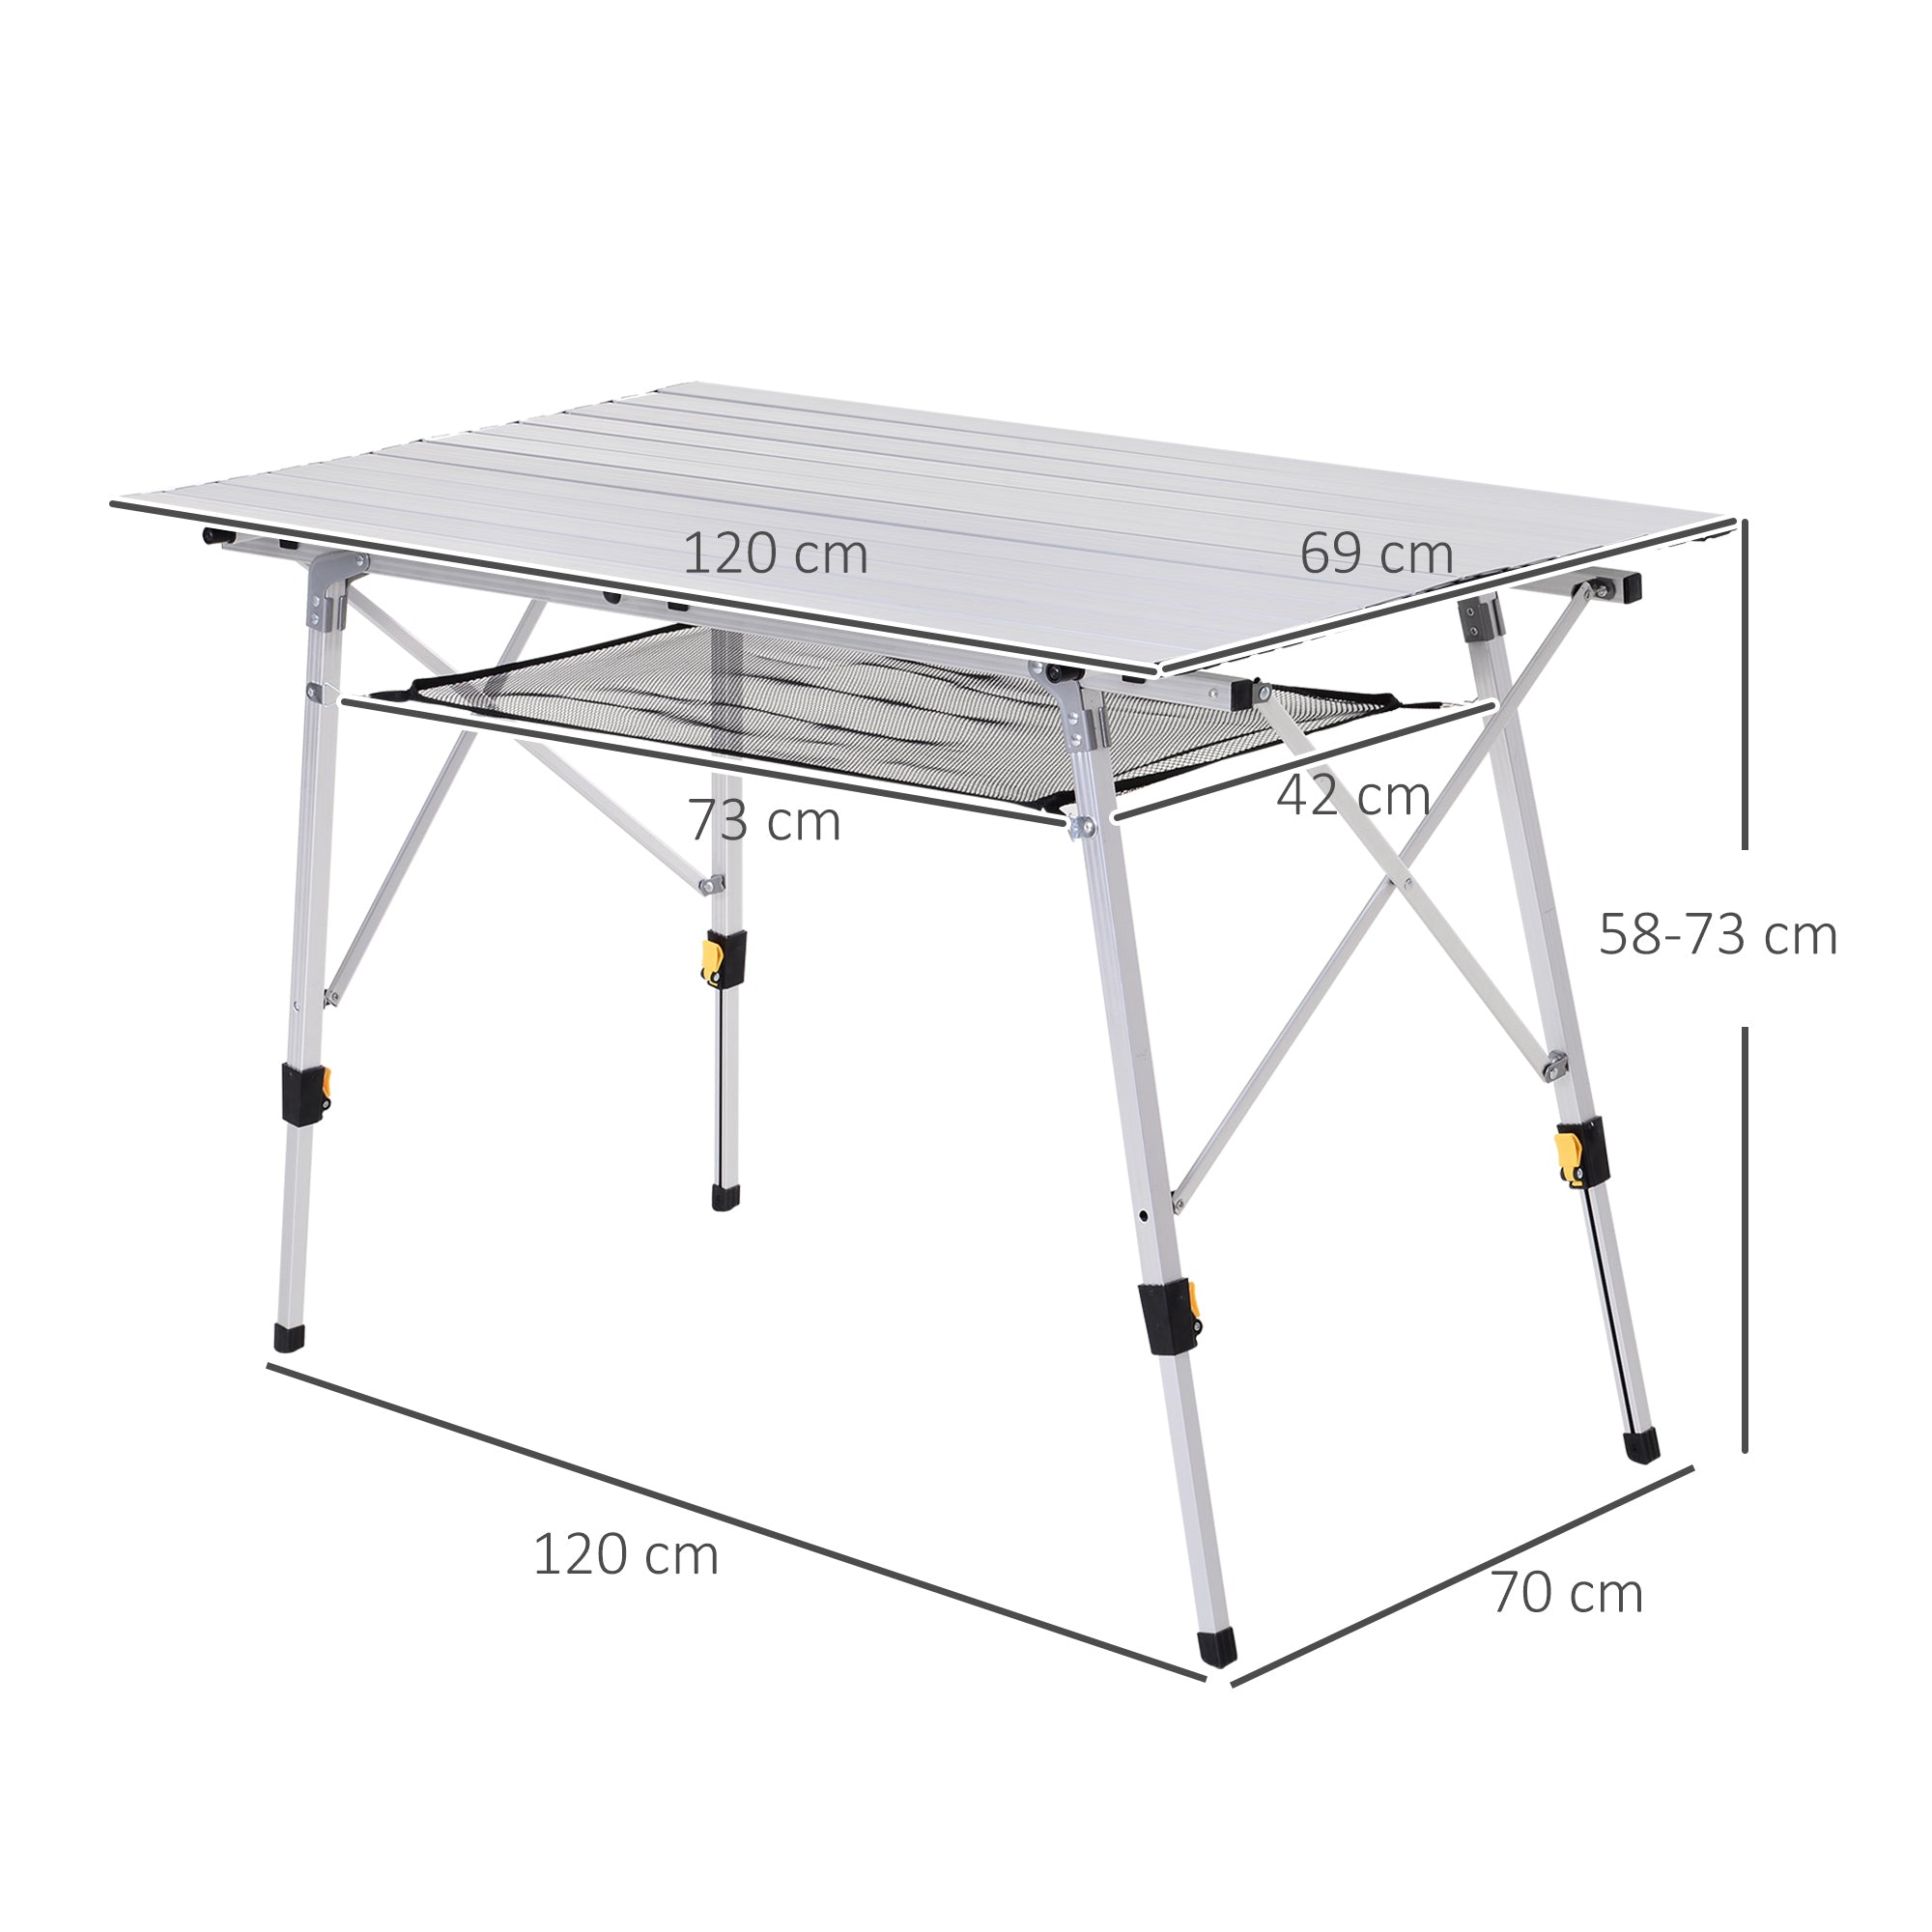 Outsunny 4FT Folding Aluminium Picnic Table Portable Camping BBQ Table Roll Up Top Mesh Layer Rack with Carrying Bag